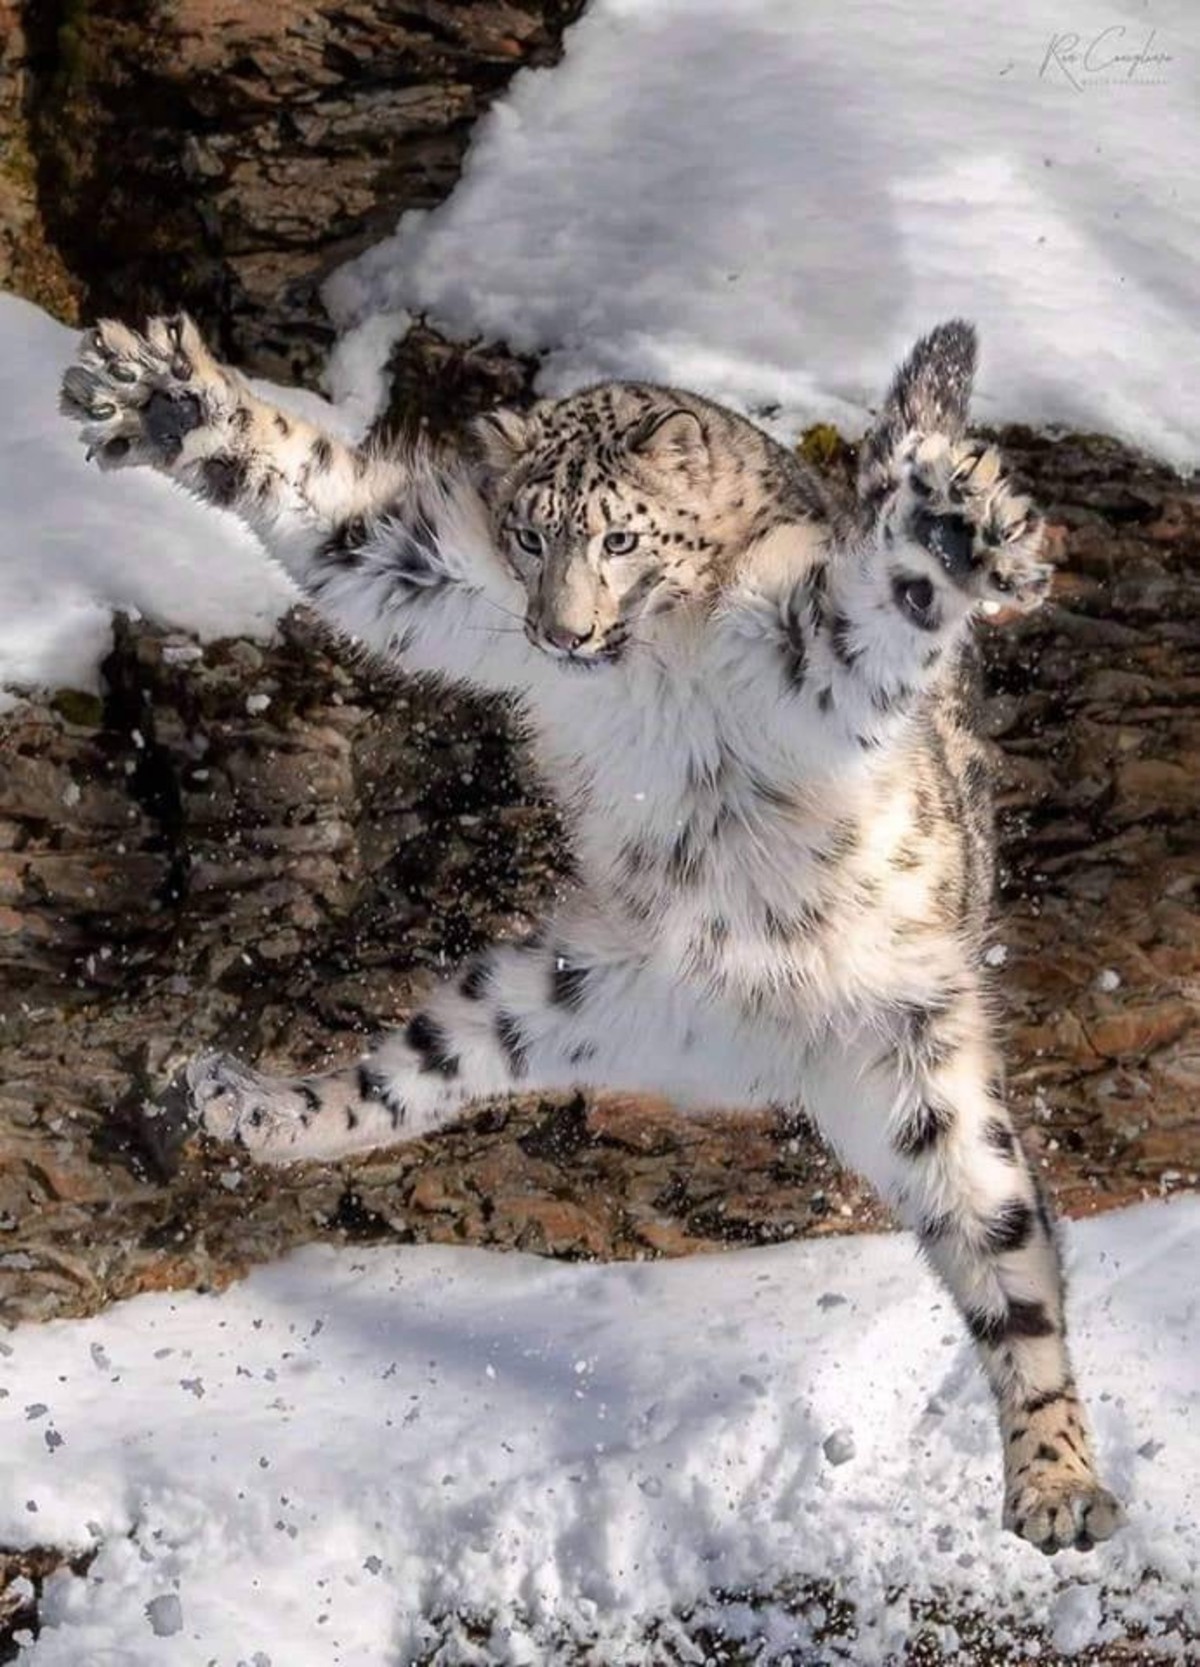 Leaping Snow Leopard Zerochan has 79 snow leopard anime images, and many more in its gallery. leaping snow leopard